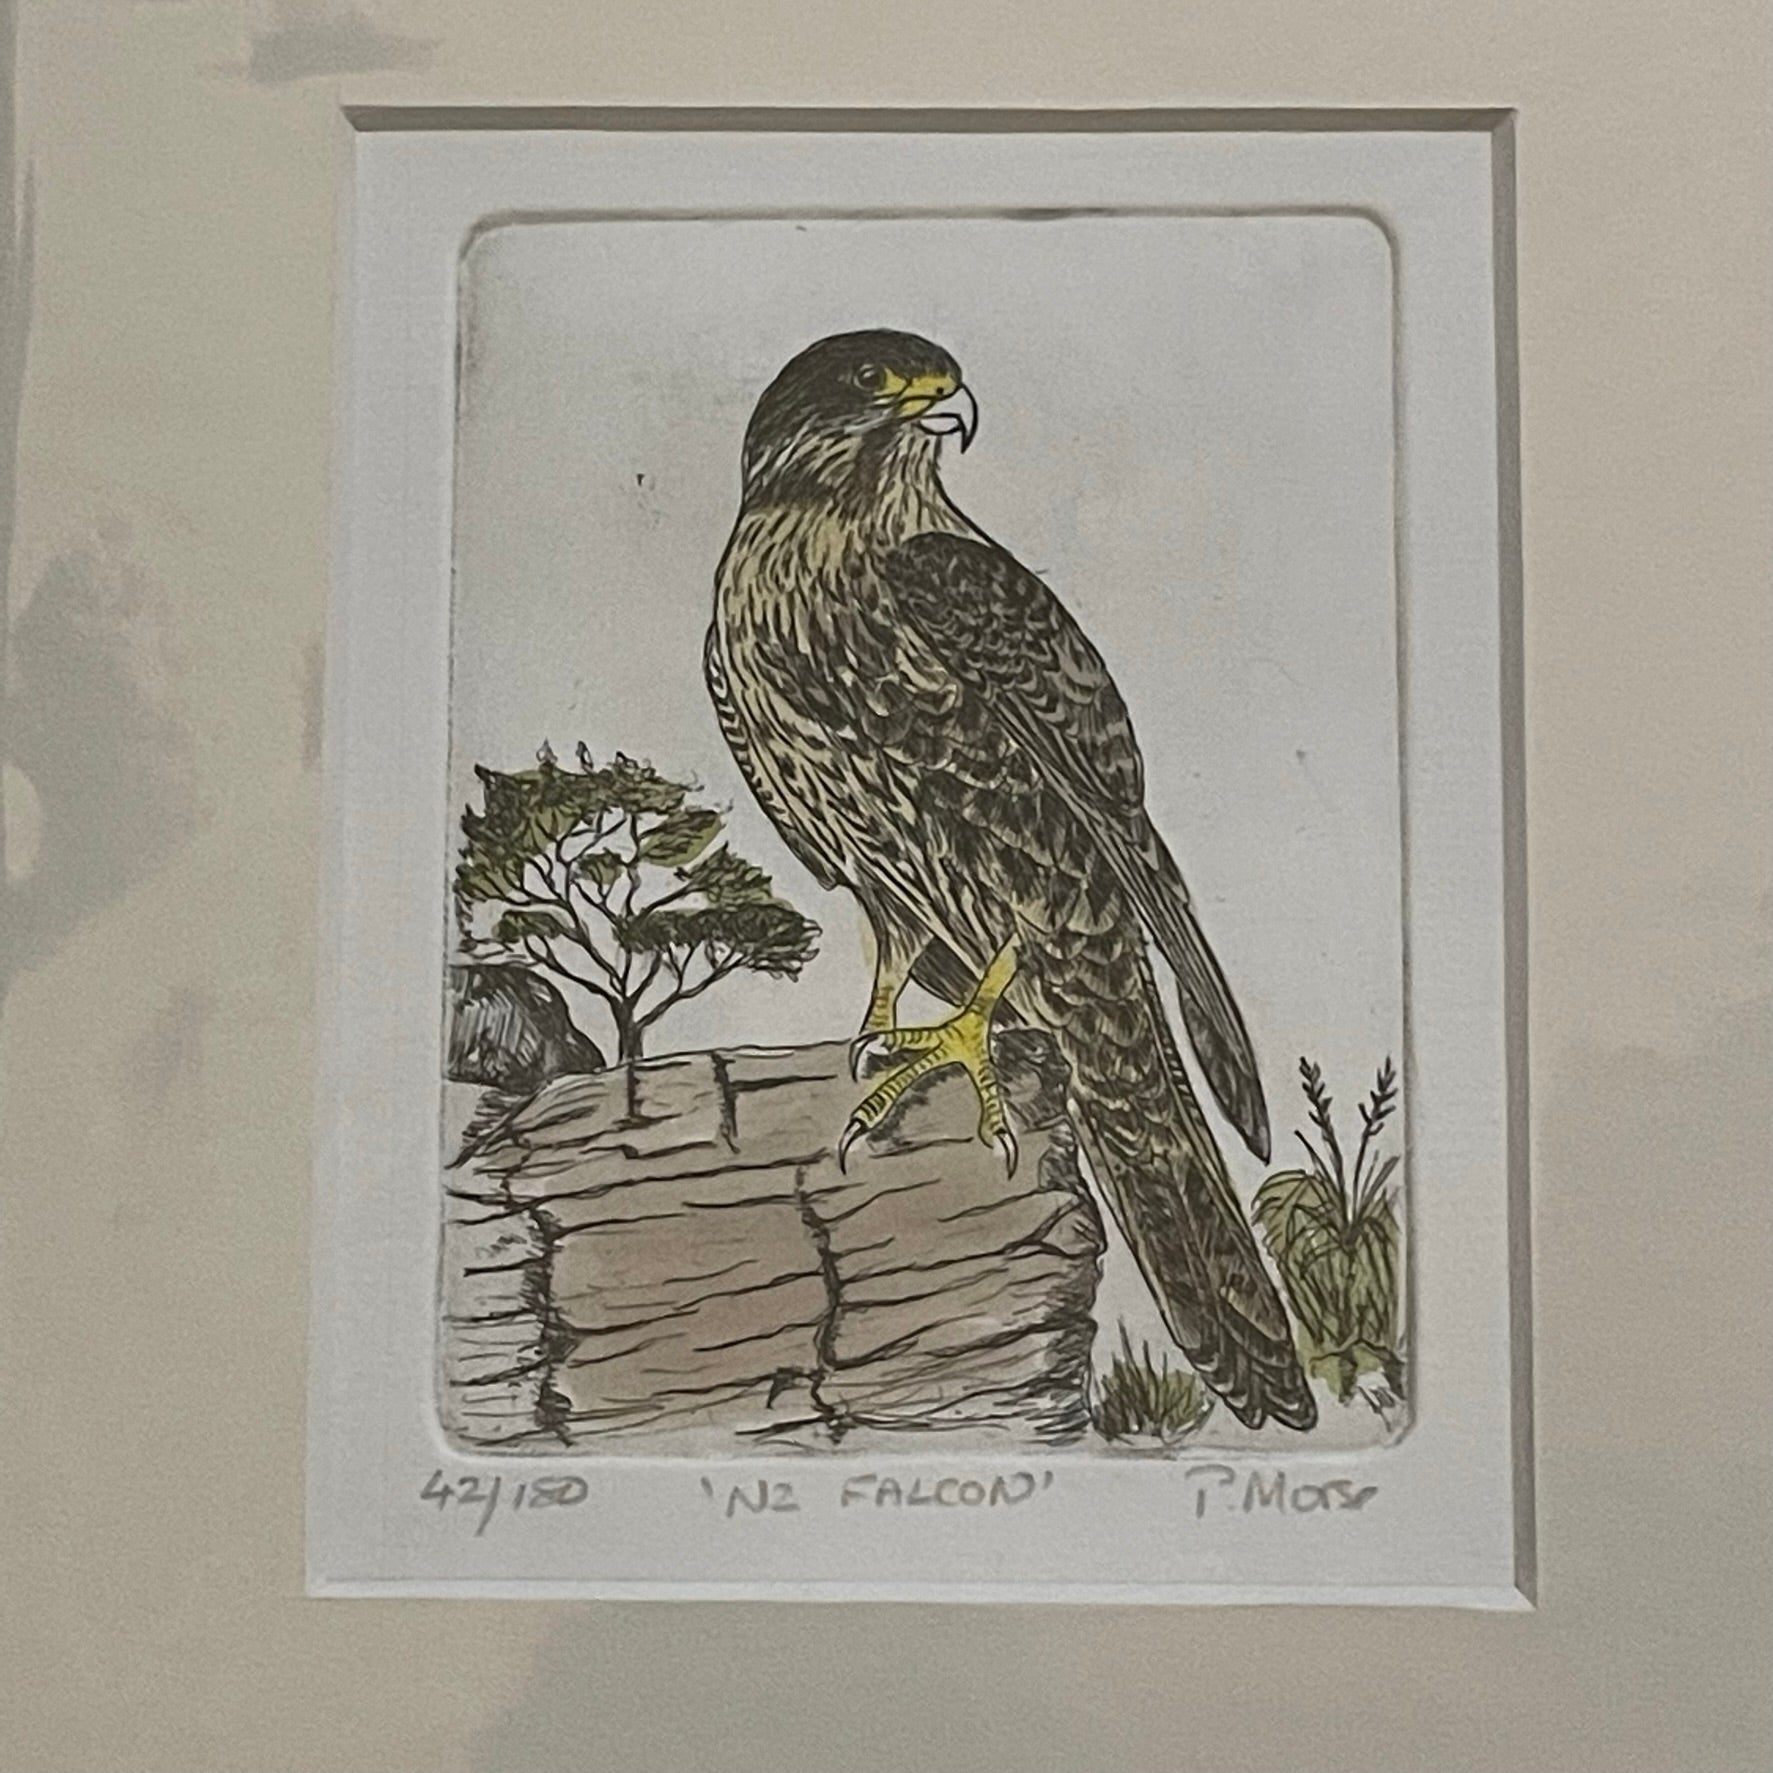 NZ Falcon Limited Edition Etching